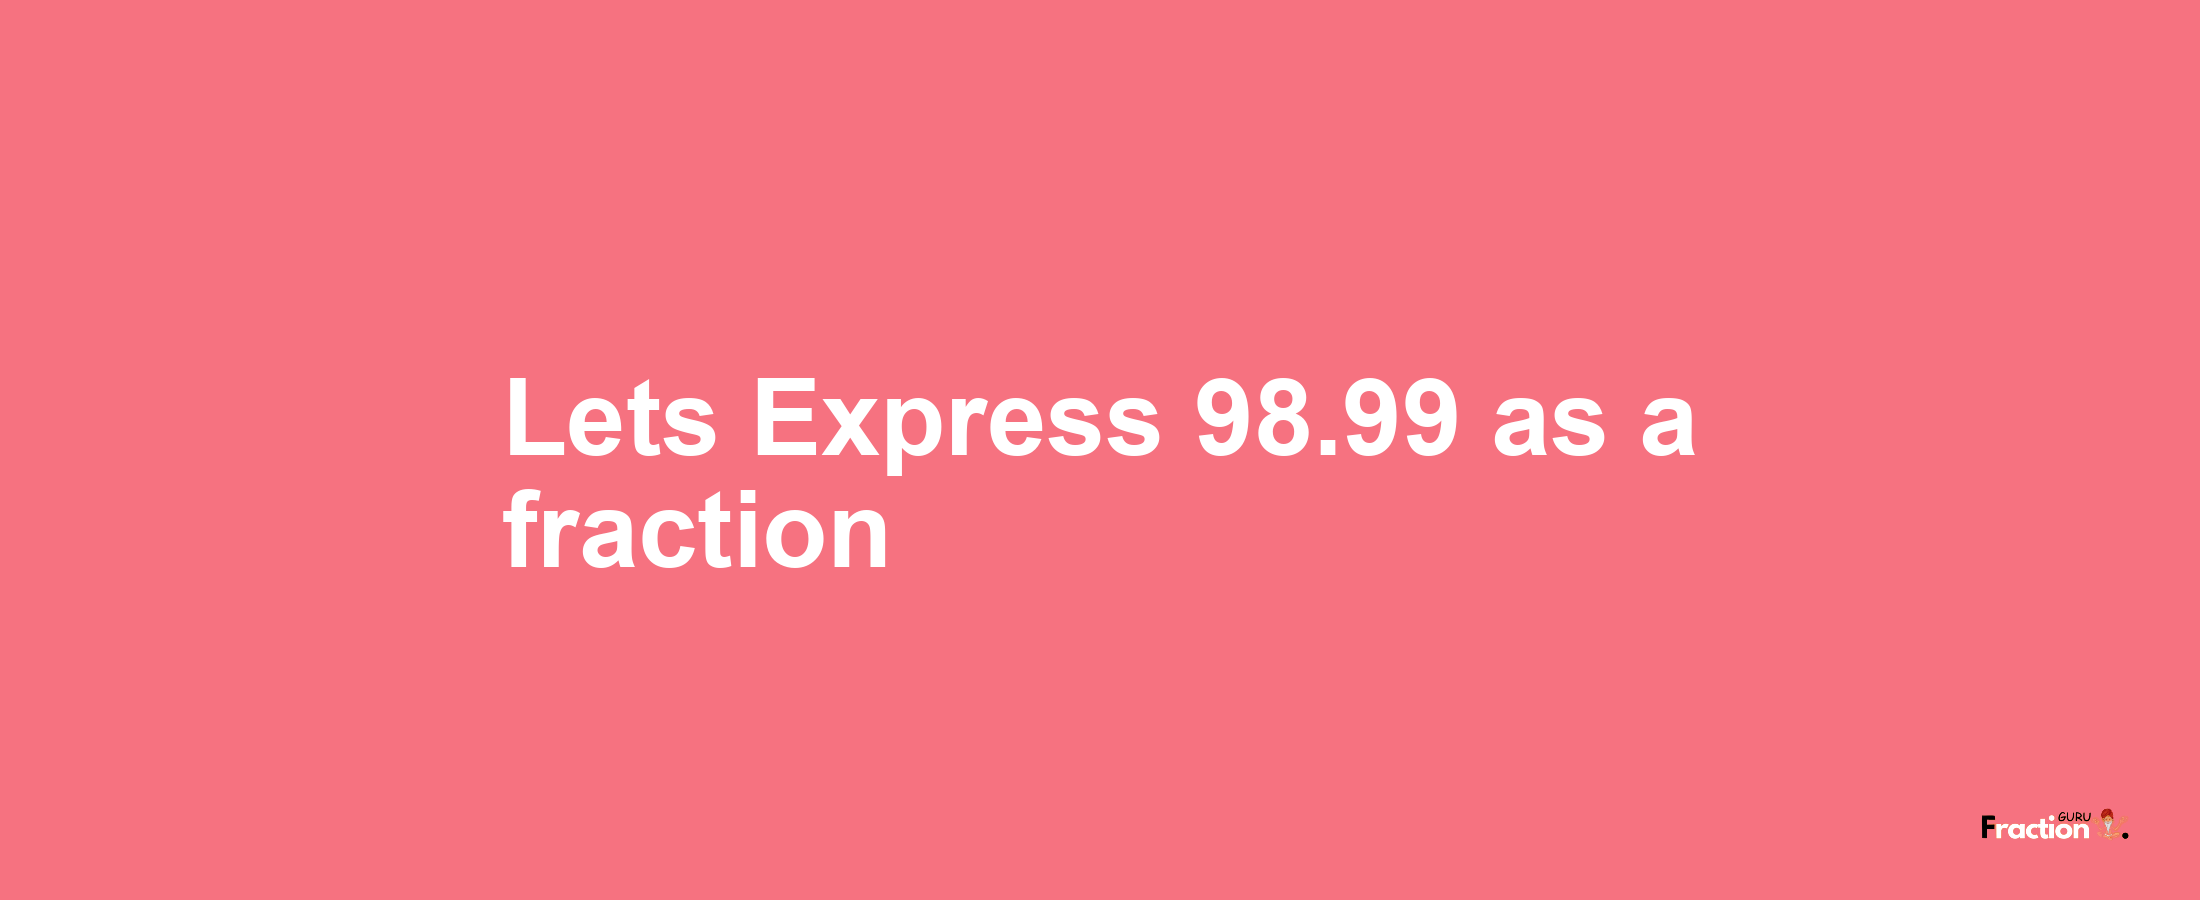 Lets Express 98.99 as afraction